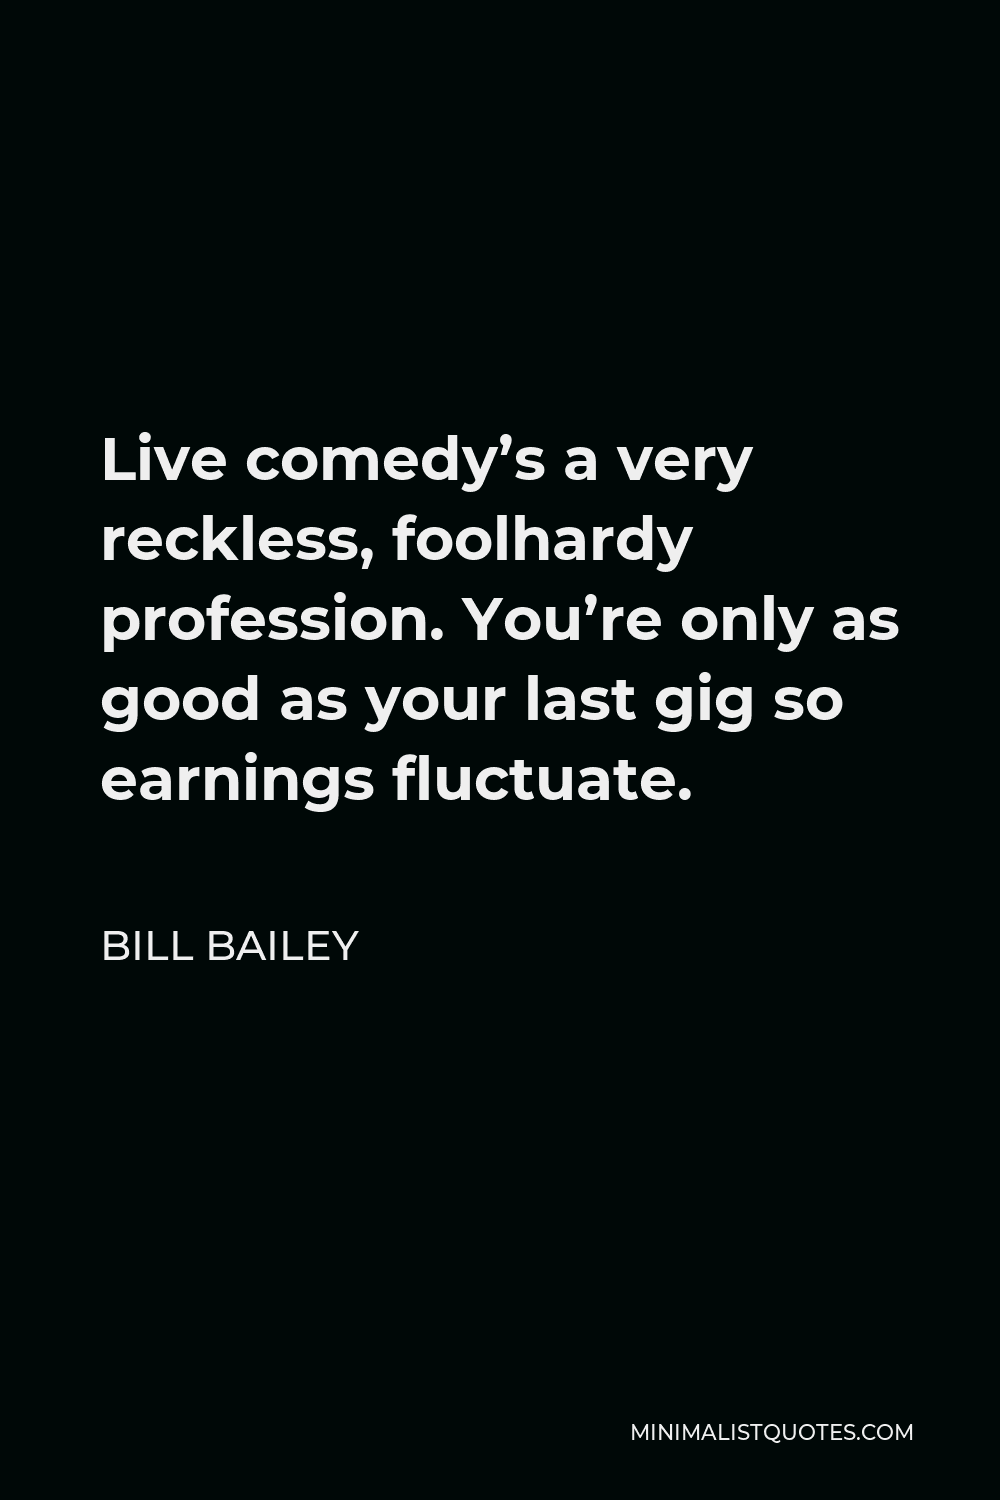 Bill Bailey Quote - Live comedy’s a very reckless, foolhardy profession. You’re only as good as your last gig so earnings fluctuate.